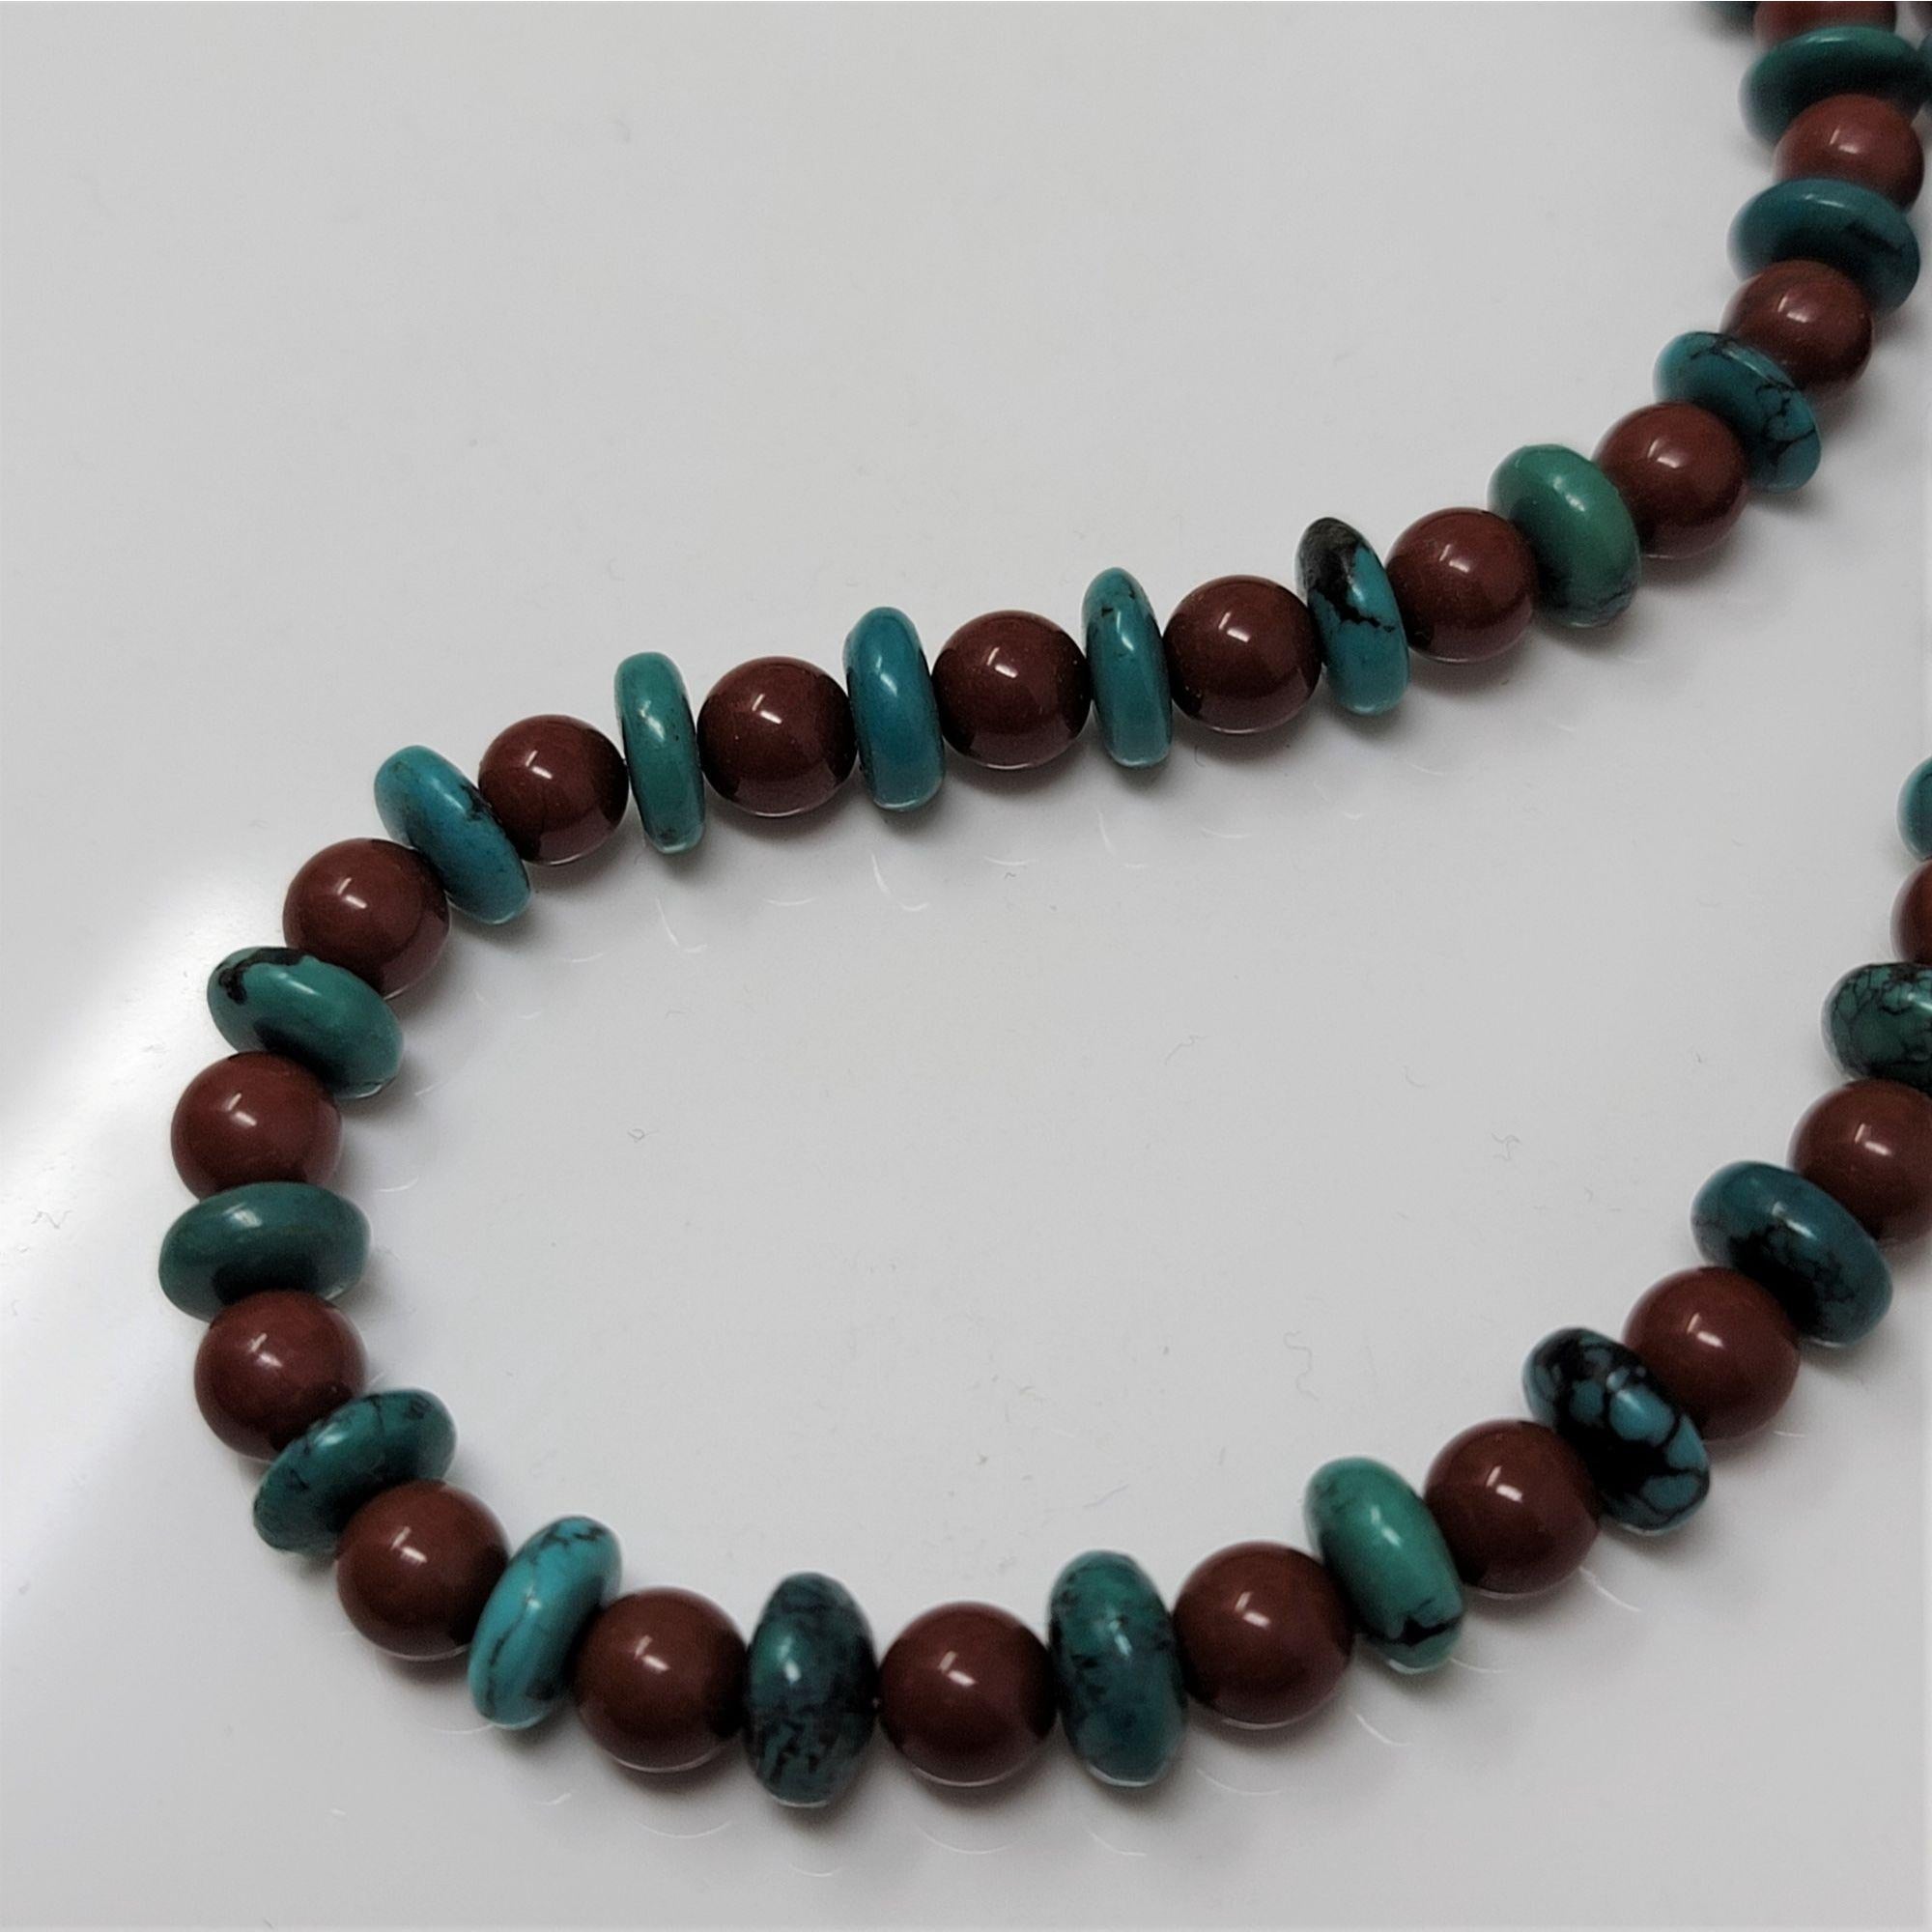 Awesome Turquoise & Jasper beaded Necklace Classic